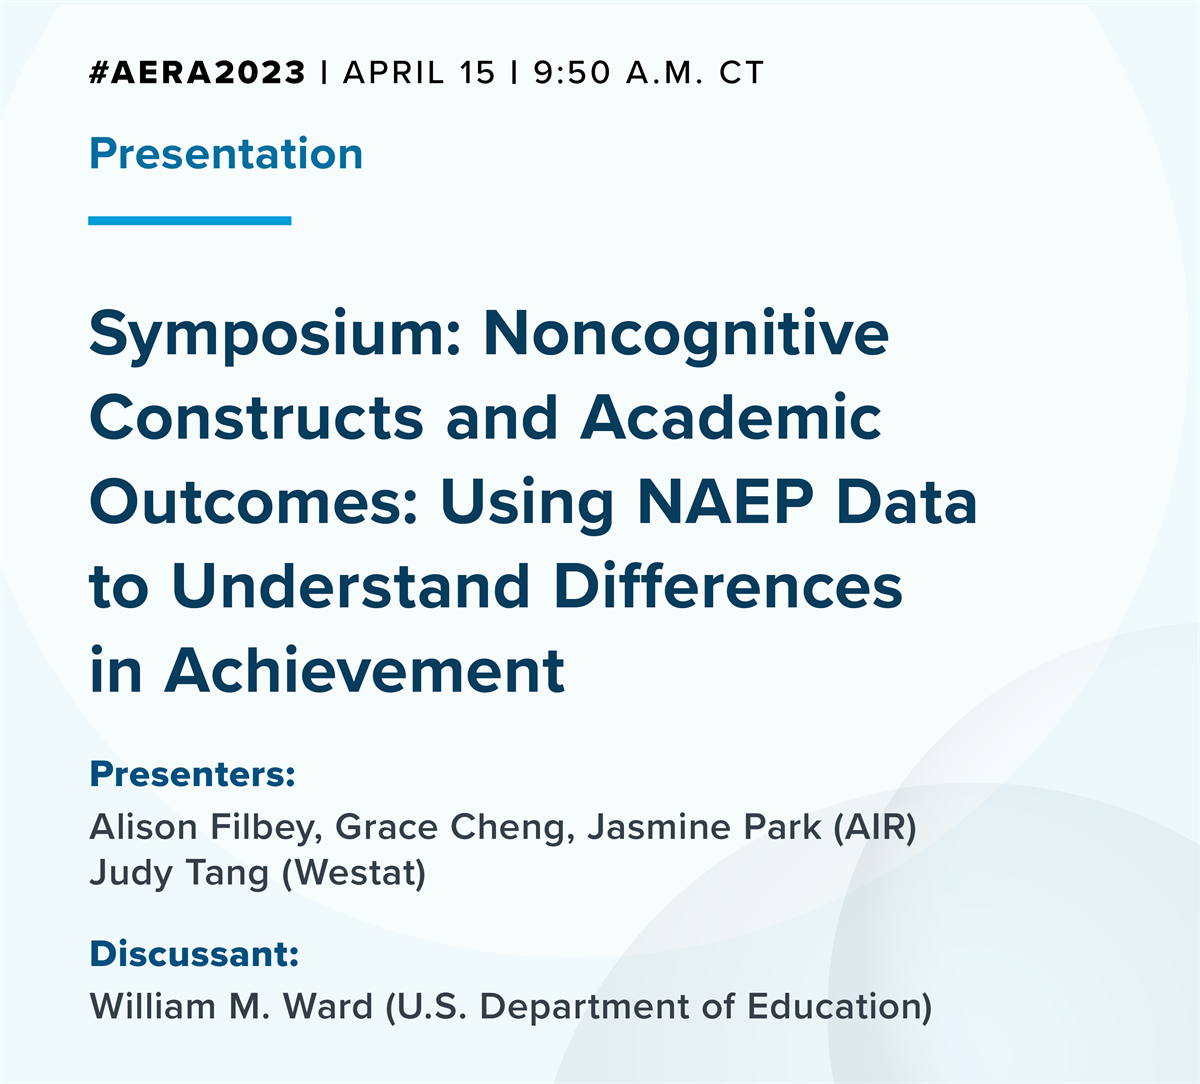 Upcoming AERA 2023 Symposium: NAEP Data and Noncognitive Constructs